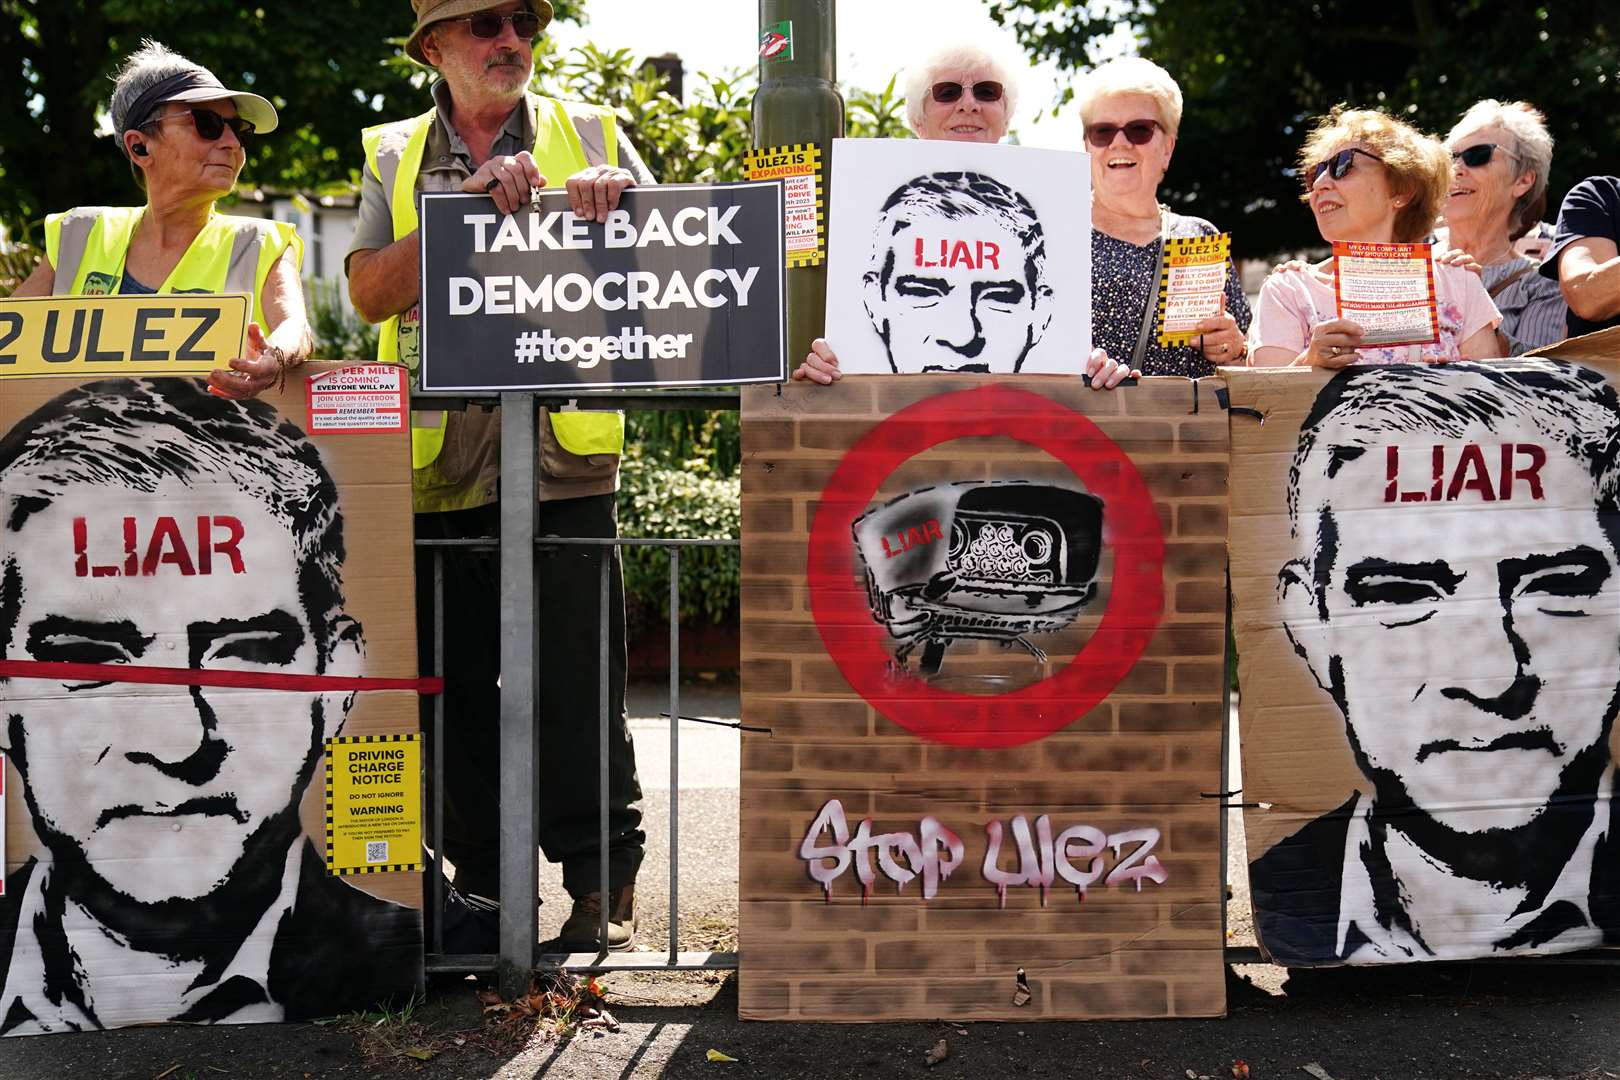 Plans to expand Ulez have sparked demonstrations (Victoria Jones/PA)